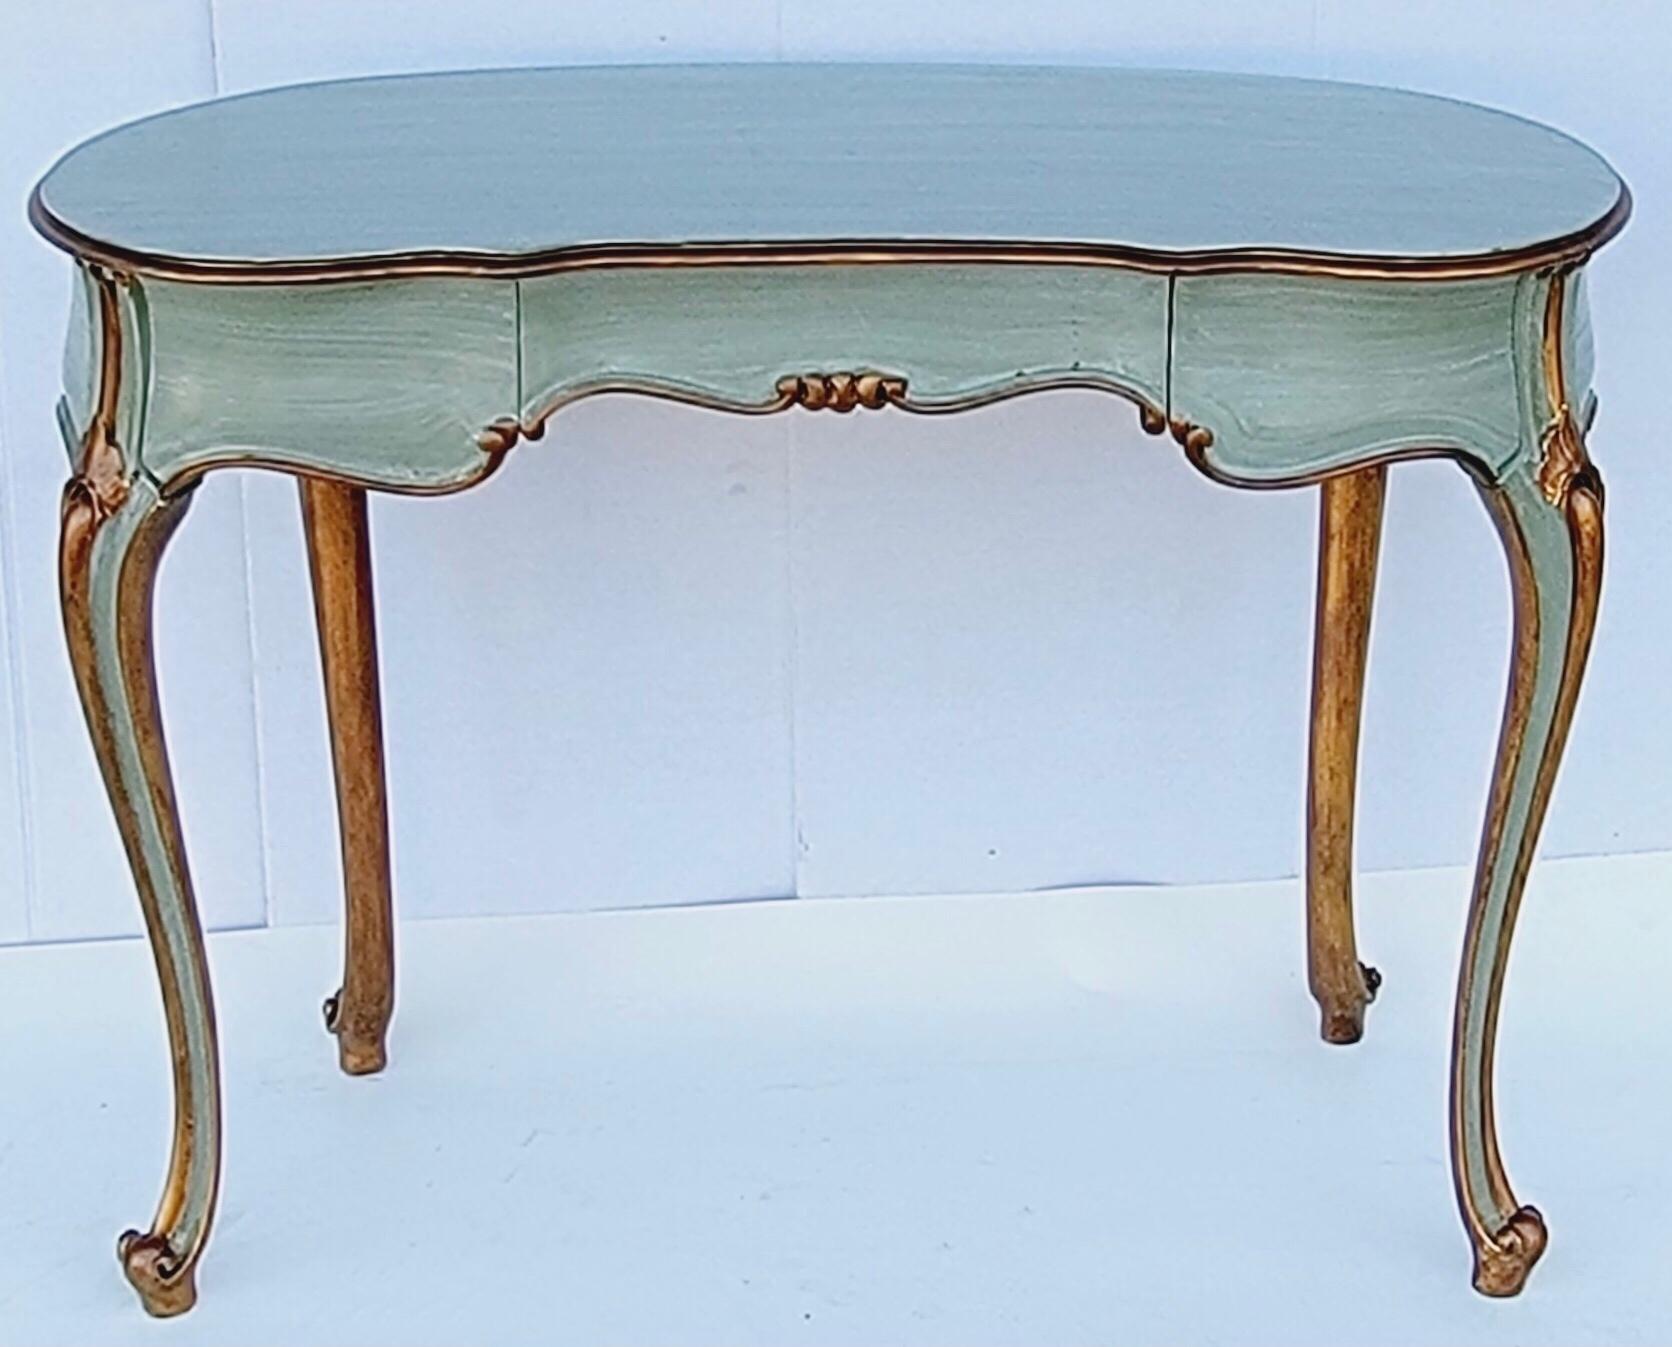 This is a lovely French carved and painted giltwood desk that could also work as a vanity or side table. It is a lovely seafoam color, and the piece does have dovetail construction.